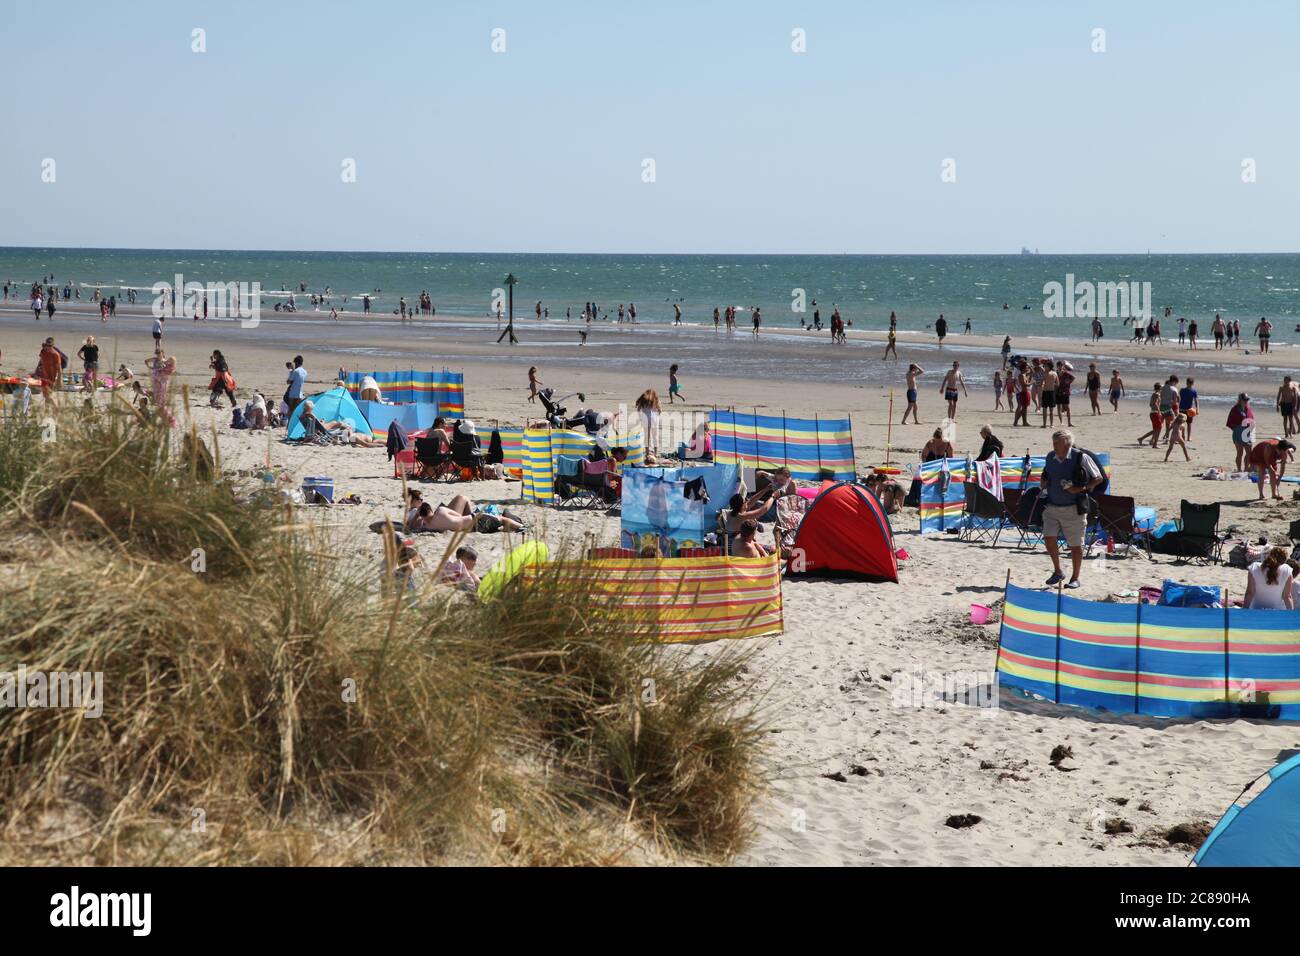 Crowds of people head to the beach after CoViD lockdown eases at West Wittering beach, Chichester, UK, July 2020 Stock Photo